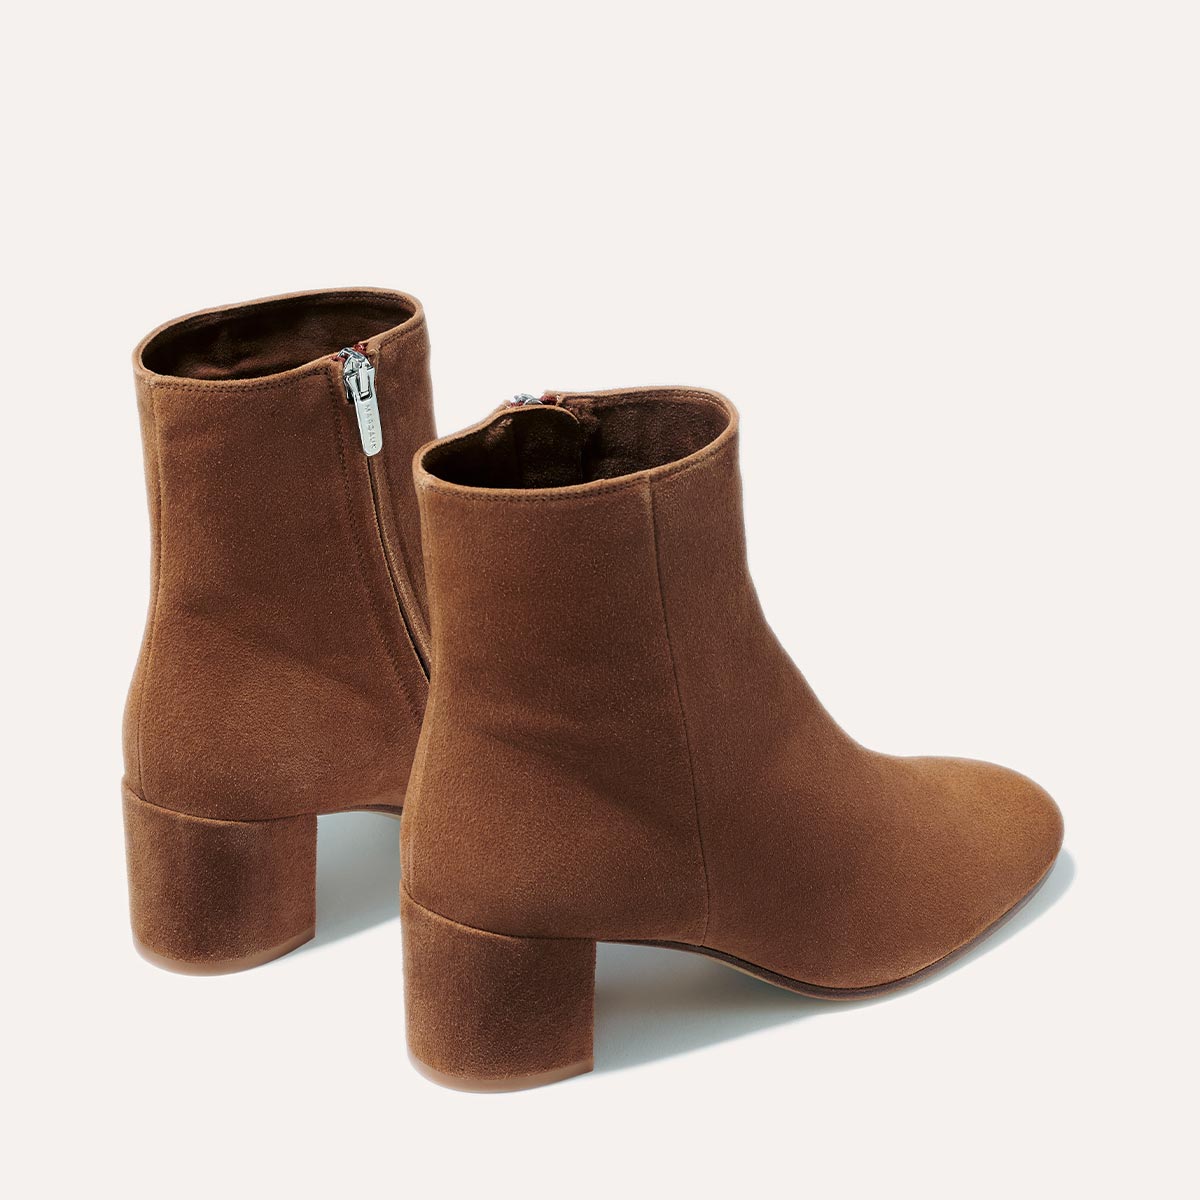 The Boot - Chestnut Suede